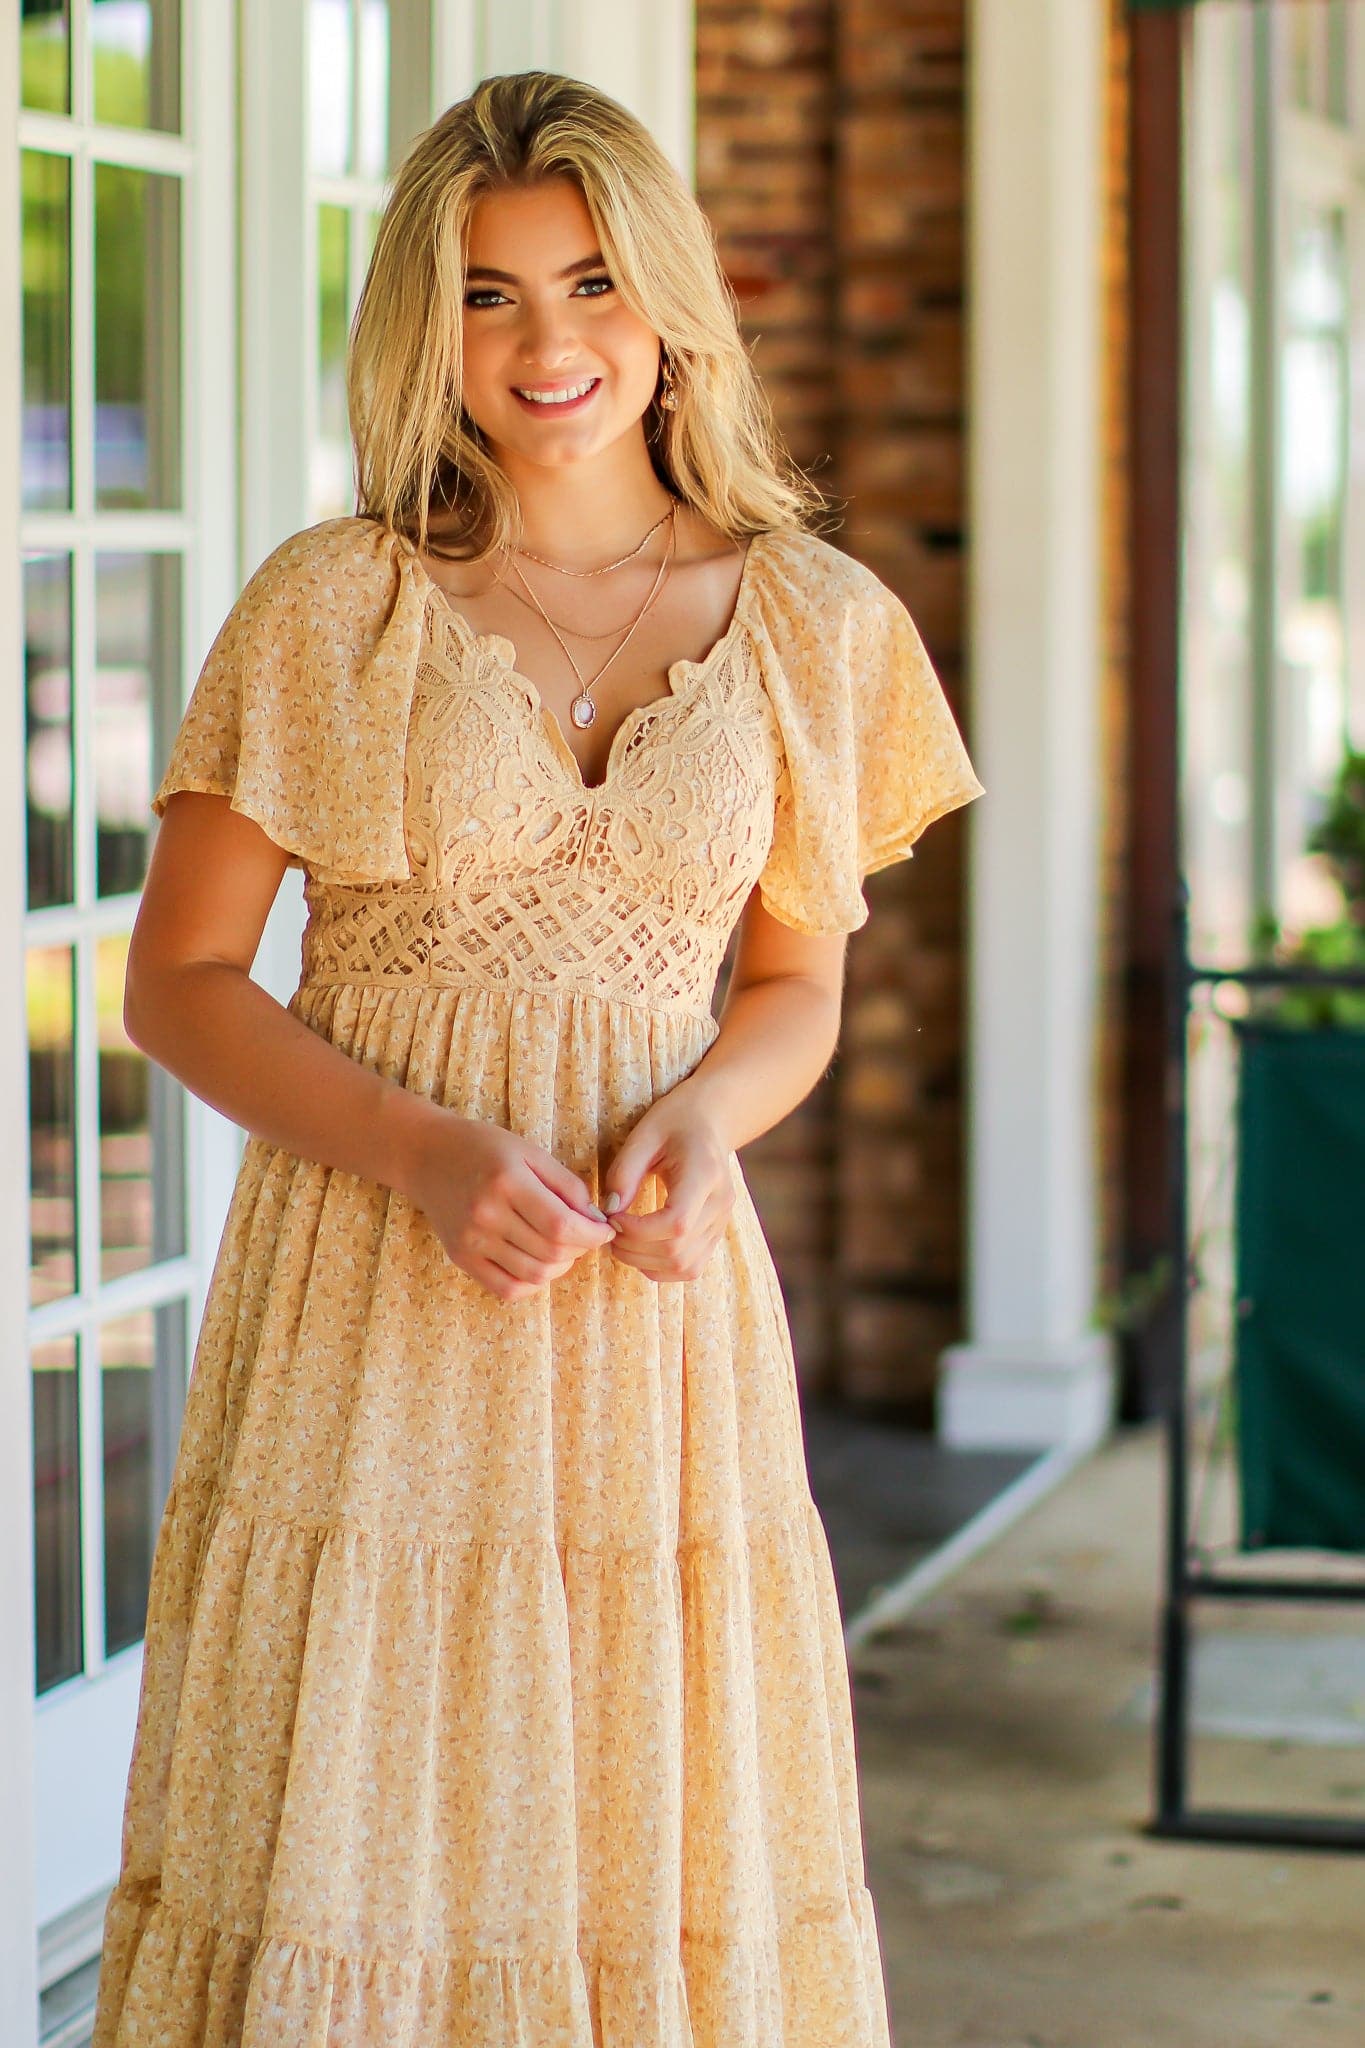  Wishful Dreams Crochet Lace Floral Dress - FINAL SALE - Madison and Mallory